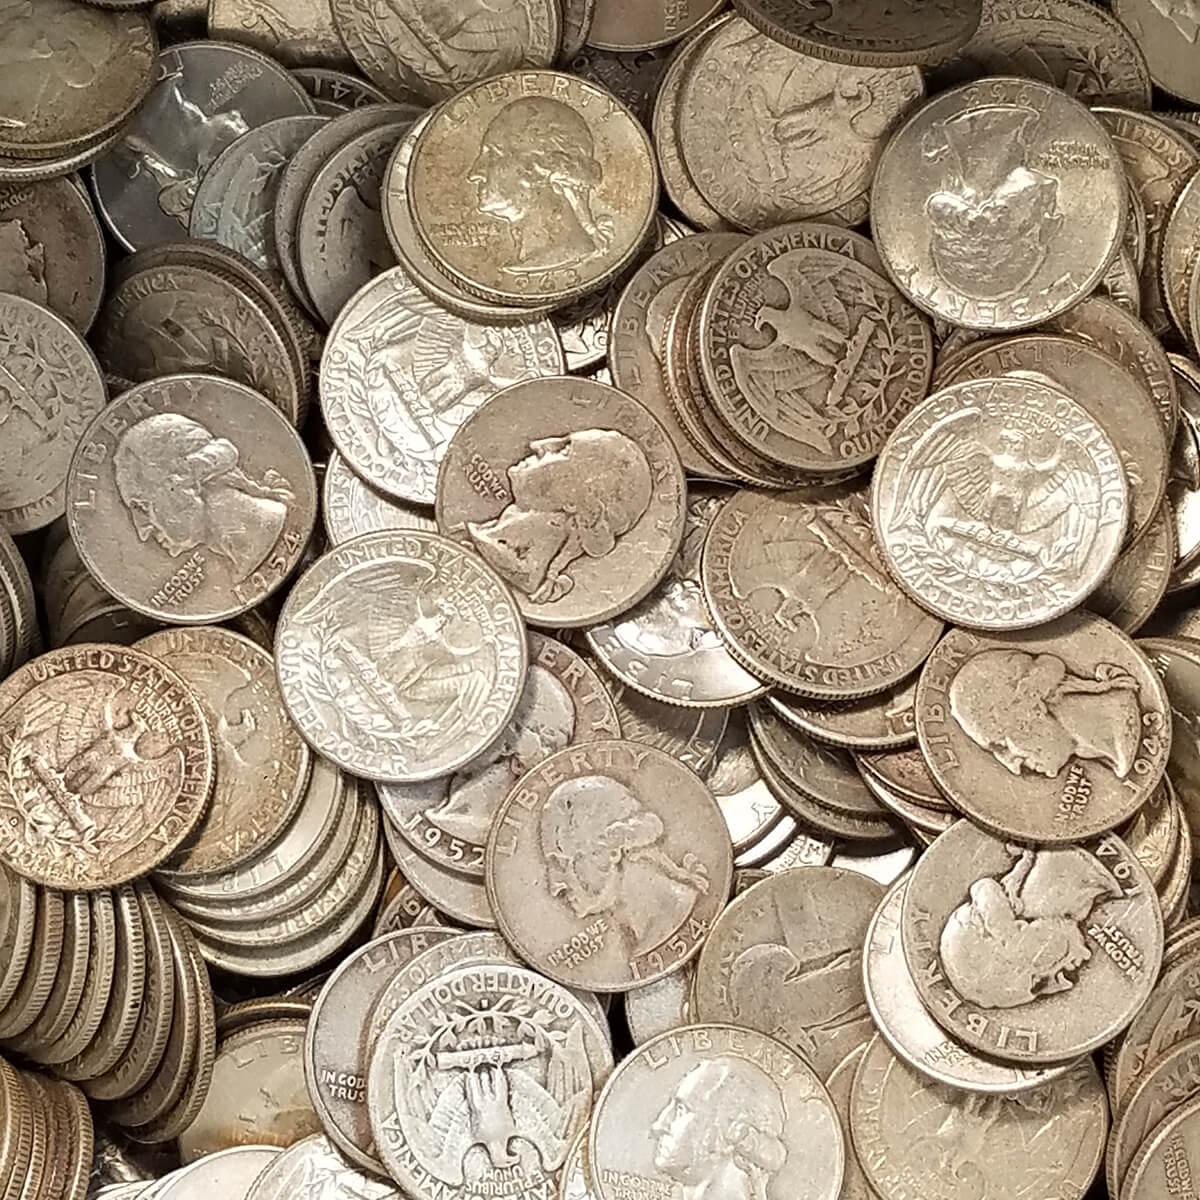 90% silver coins and quarters coins